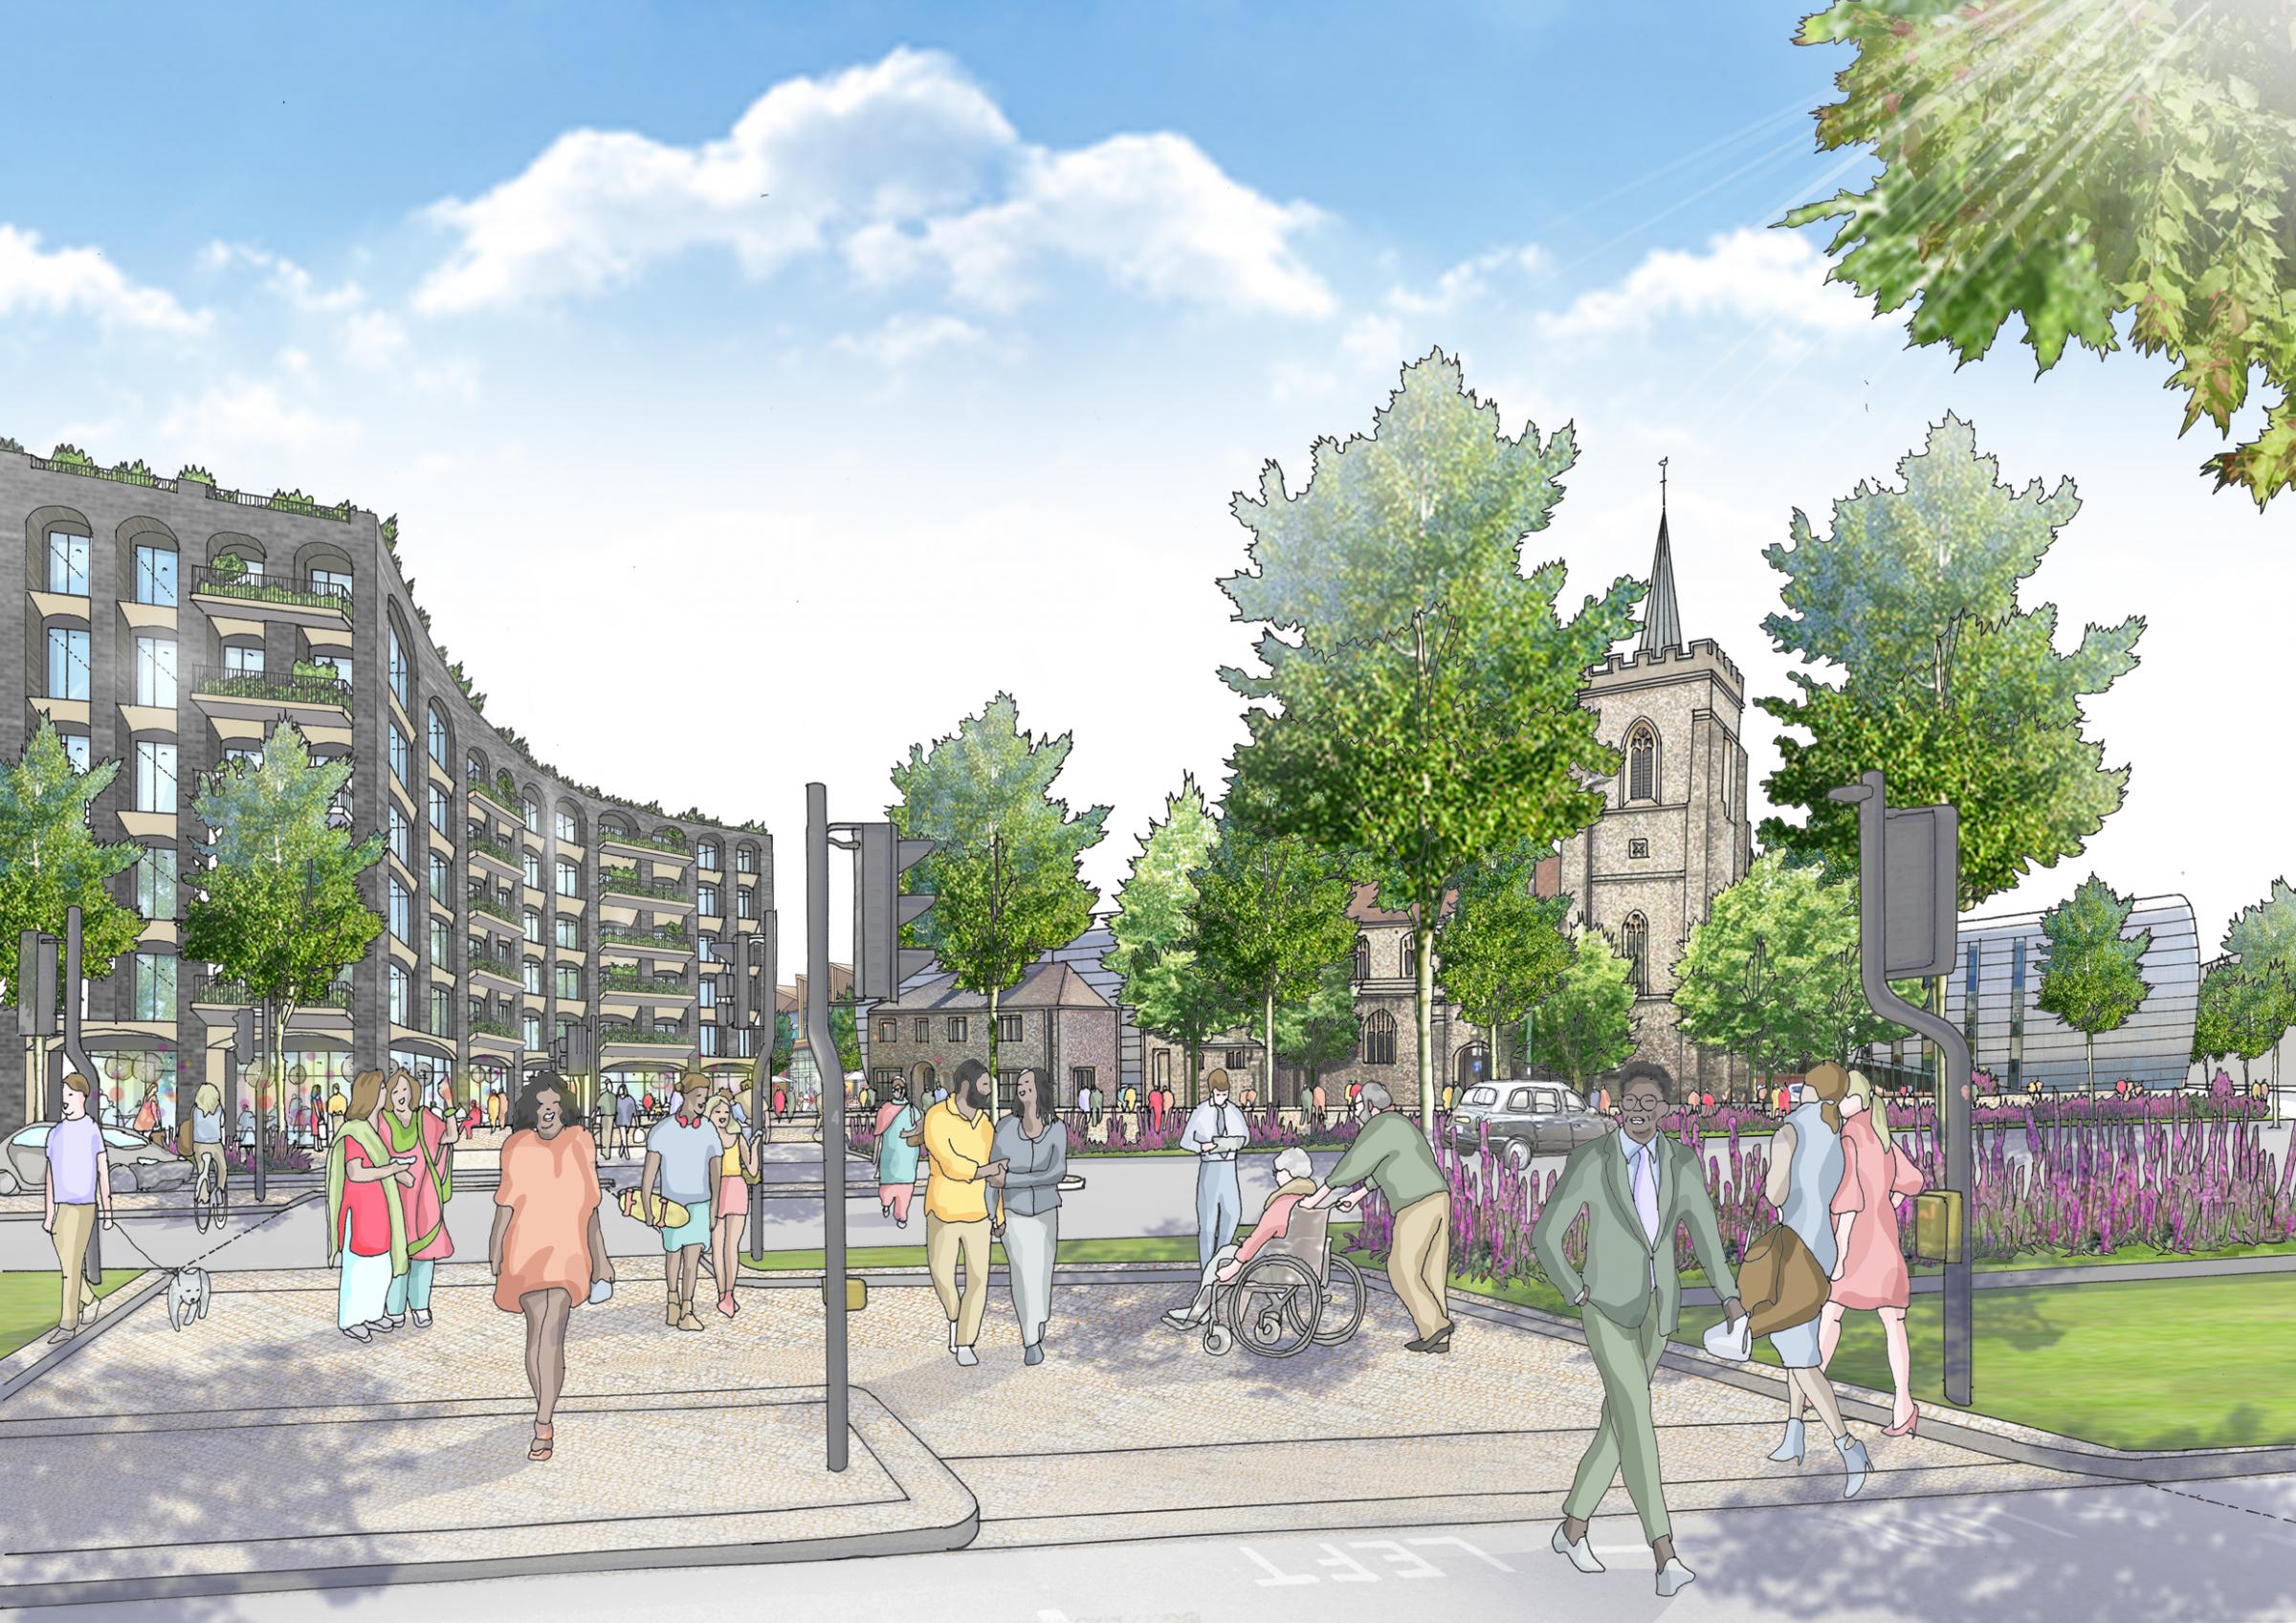 What a redeveloped town centre could look like